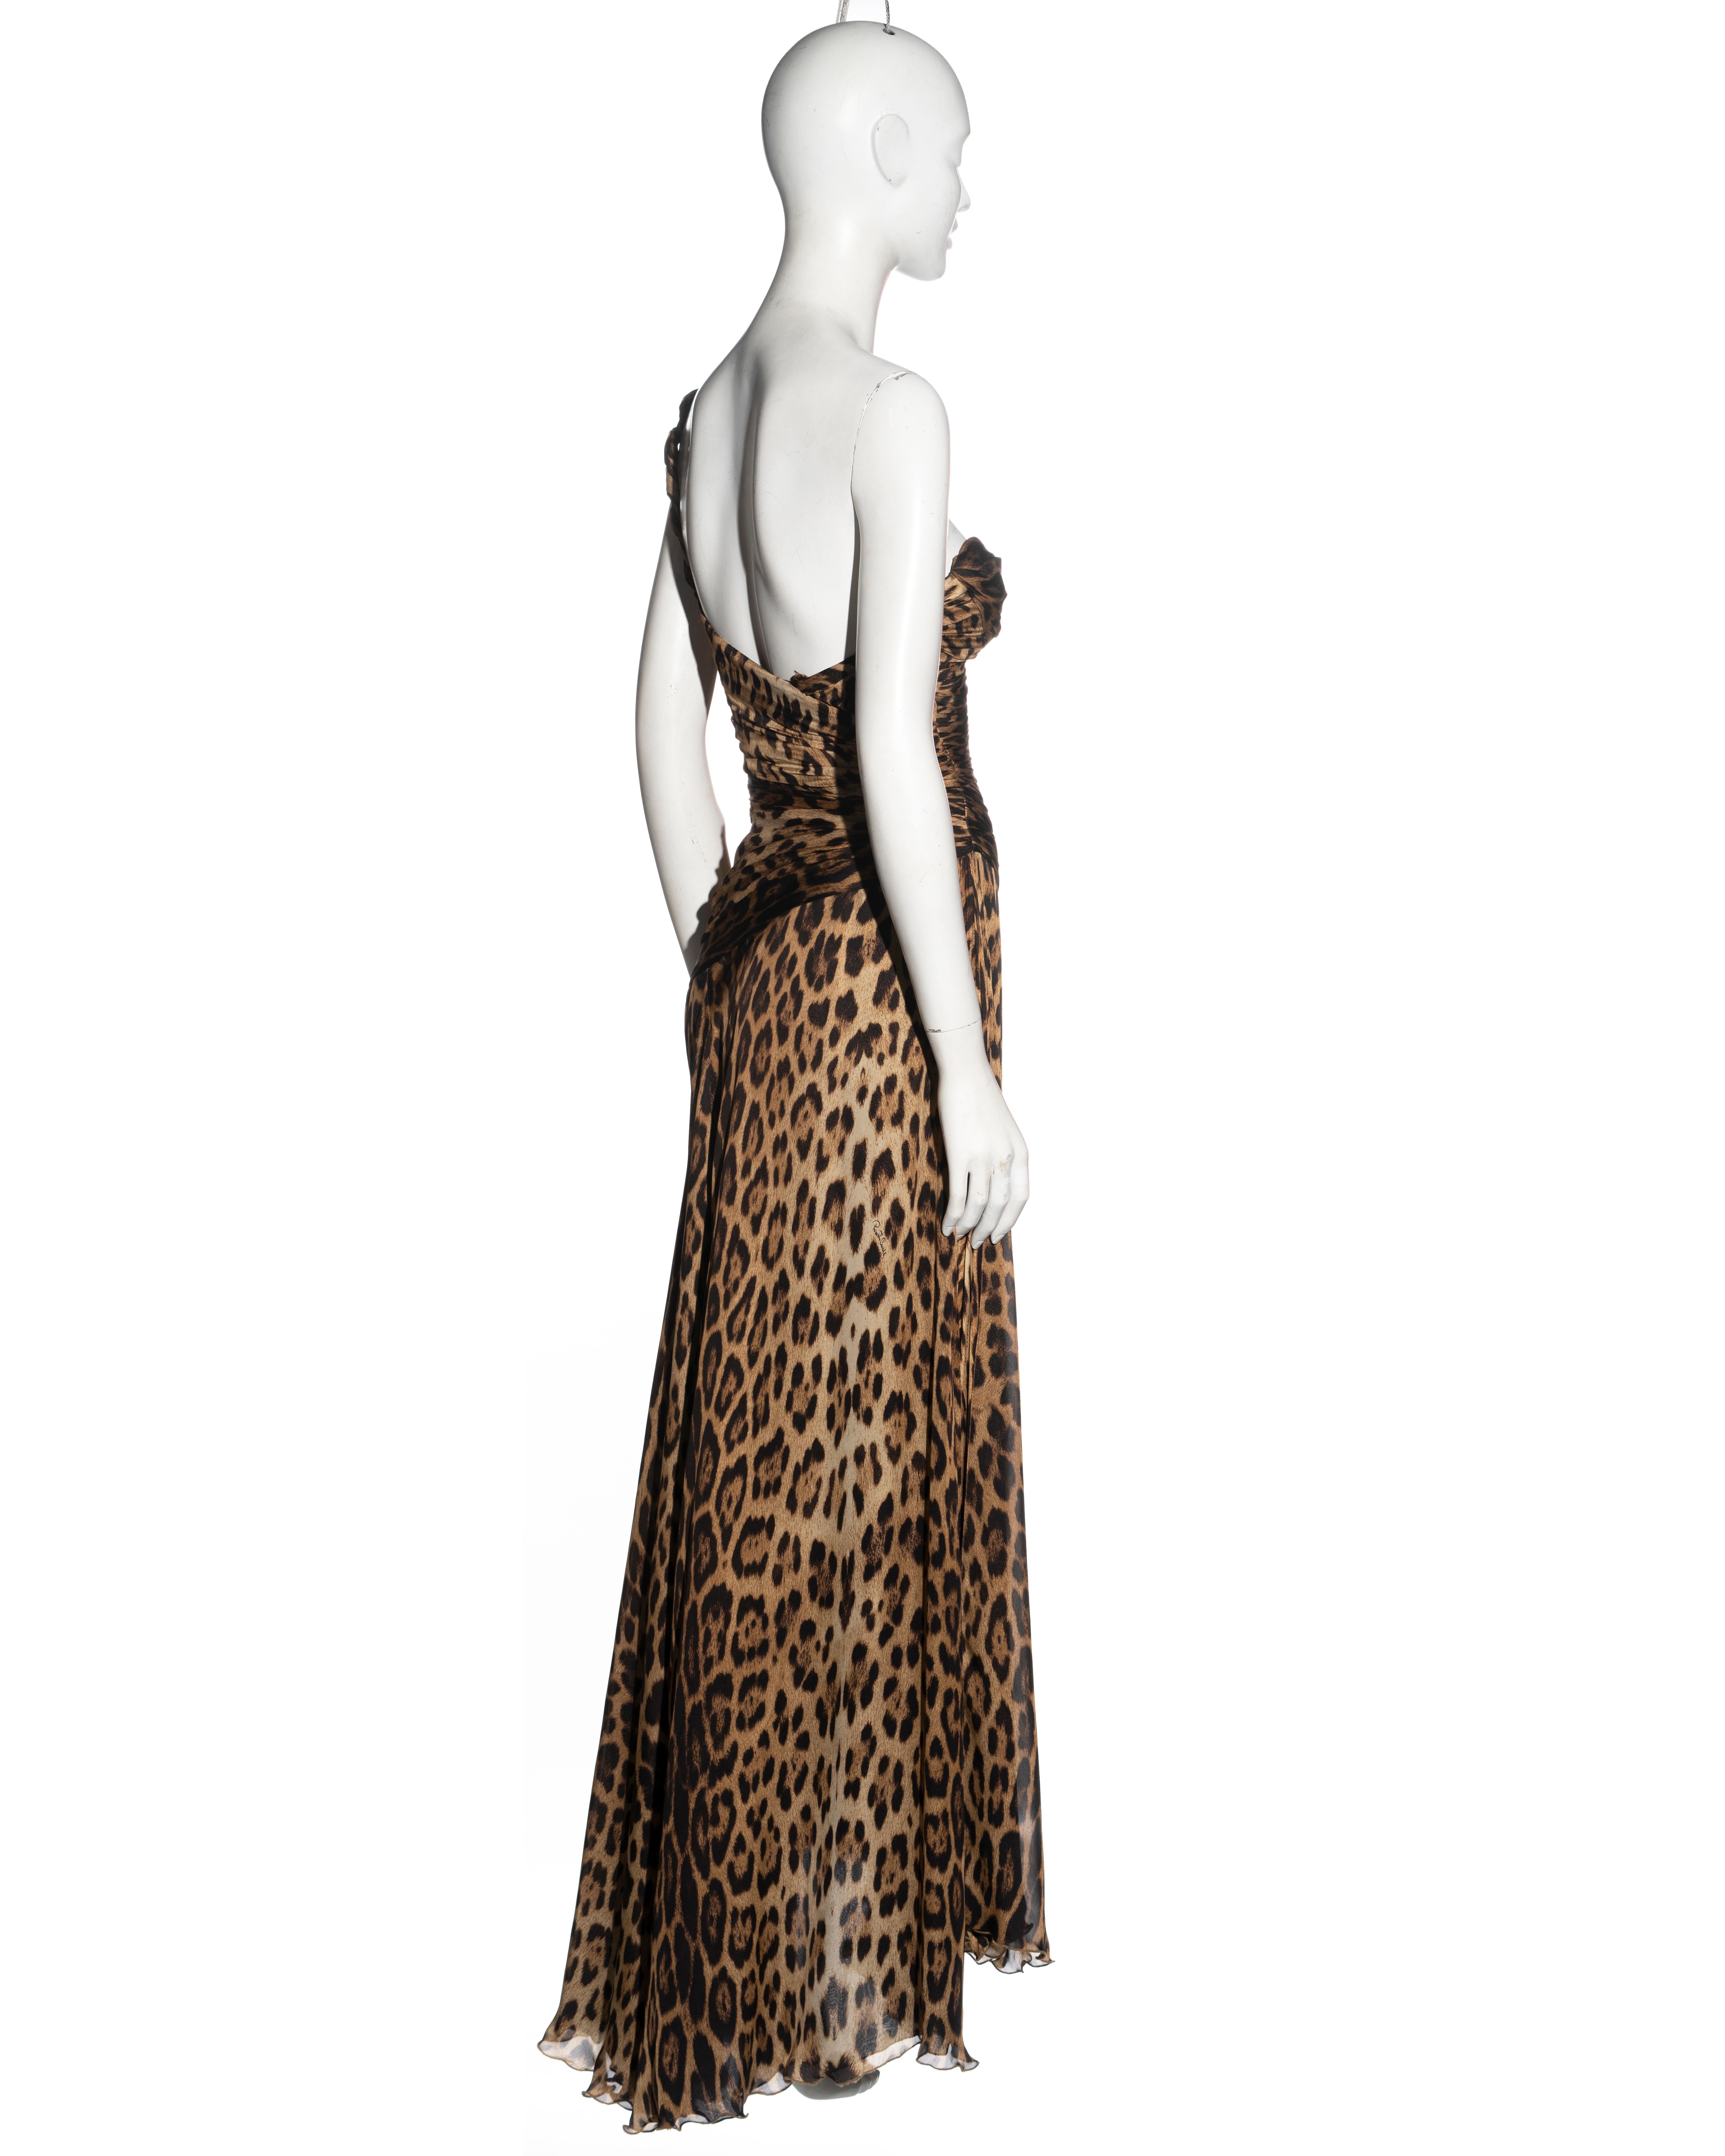 Roberto Cavalli leopard print silk evening dress with built-in corset, fw 2006 For Sale 1